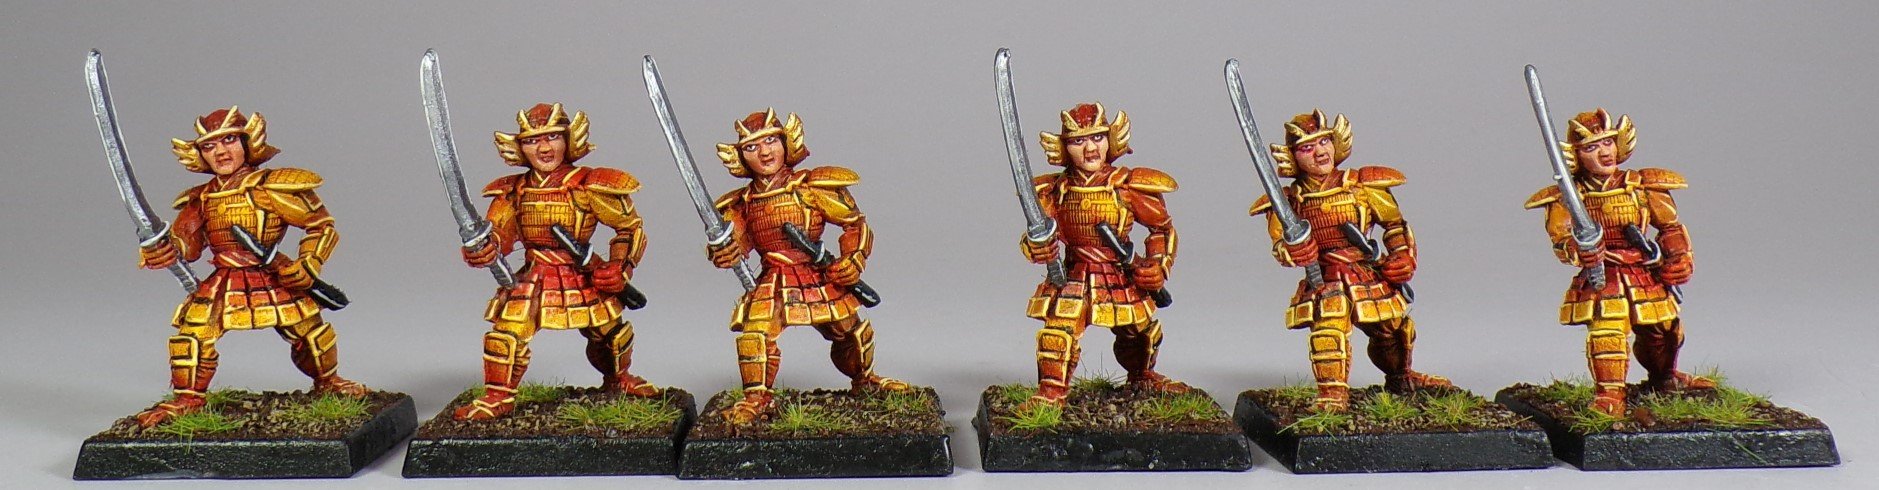 L5R Legend of the Five Rings Miniature Painting Service Paintedfigs (43).jpg